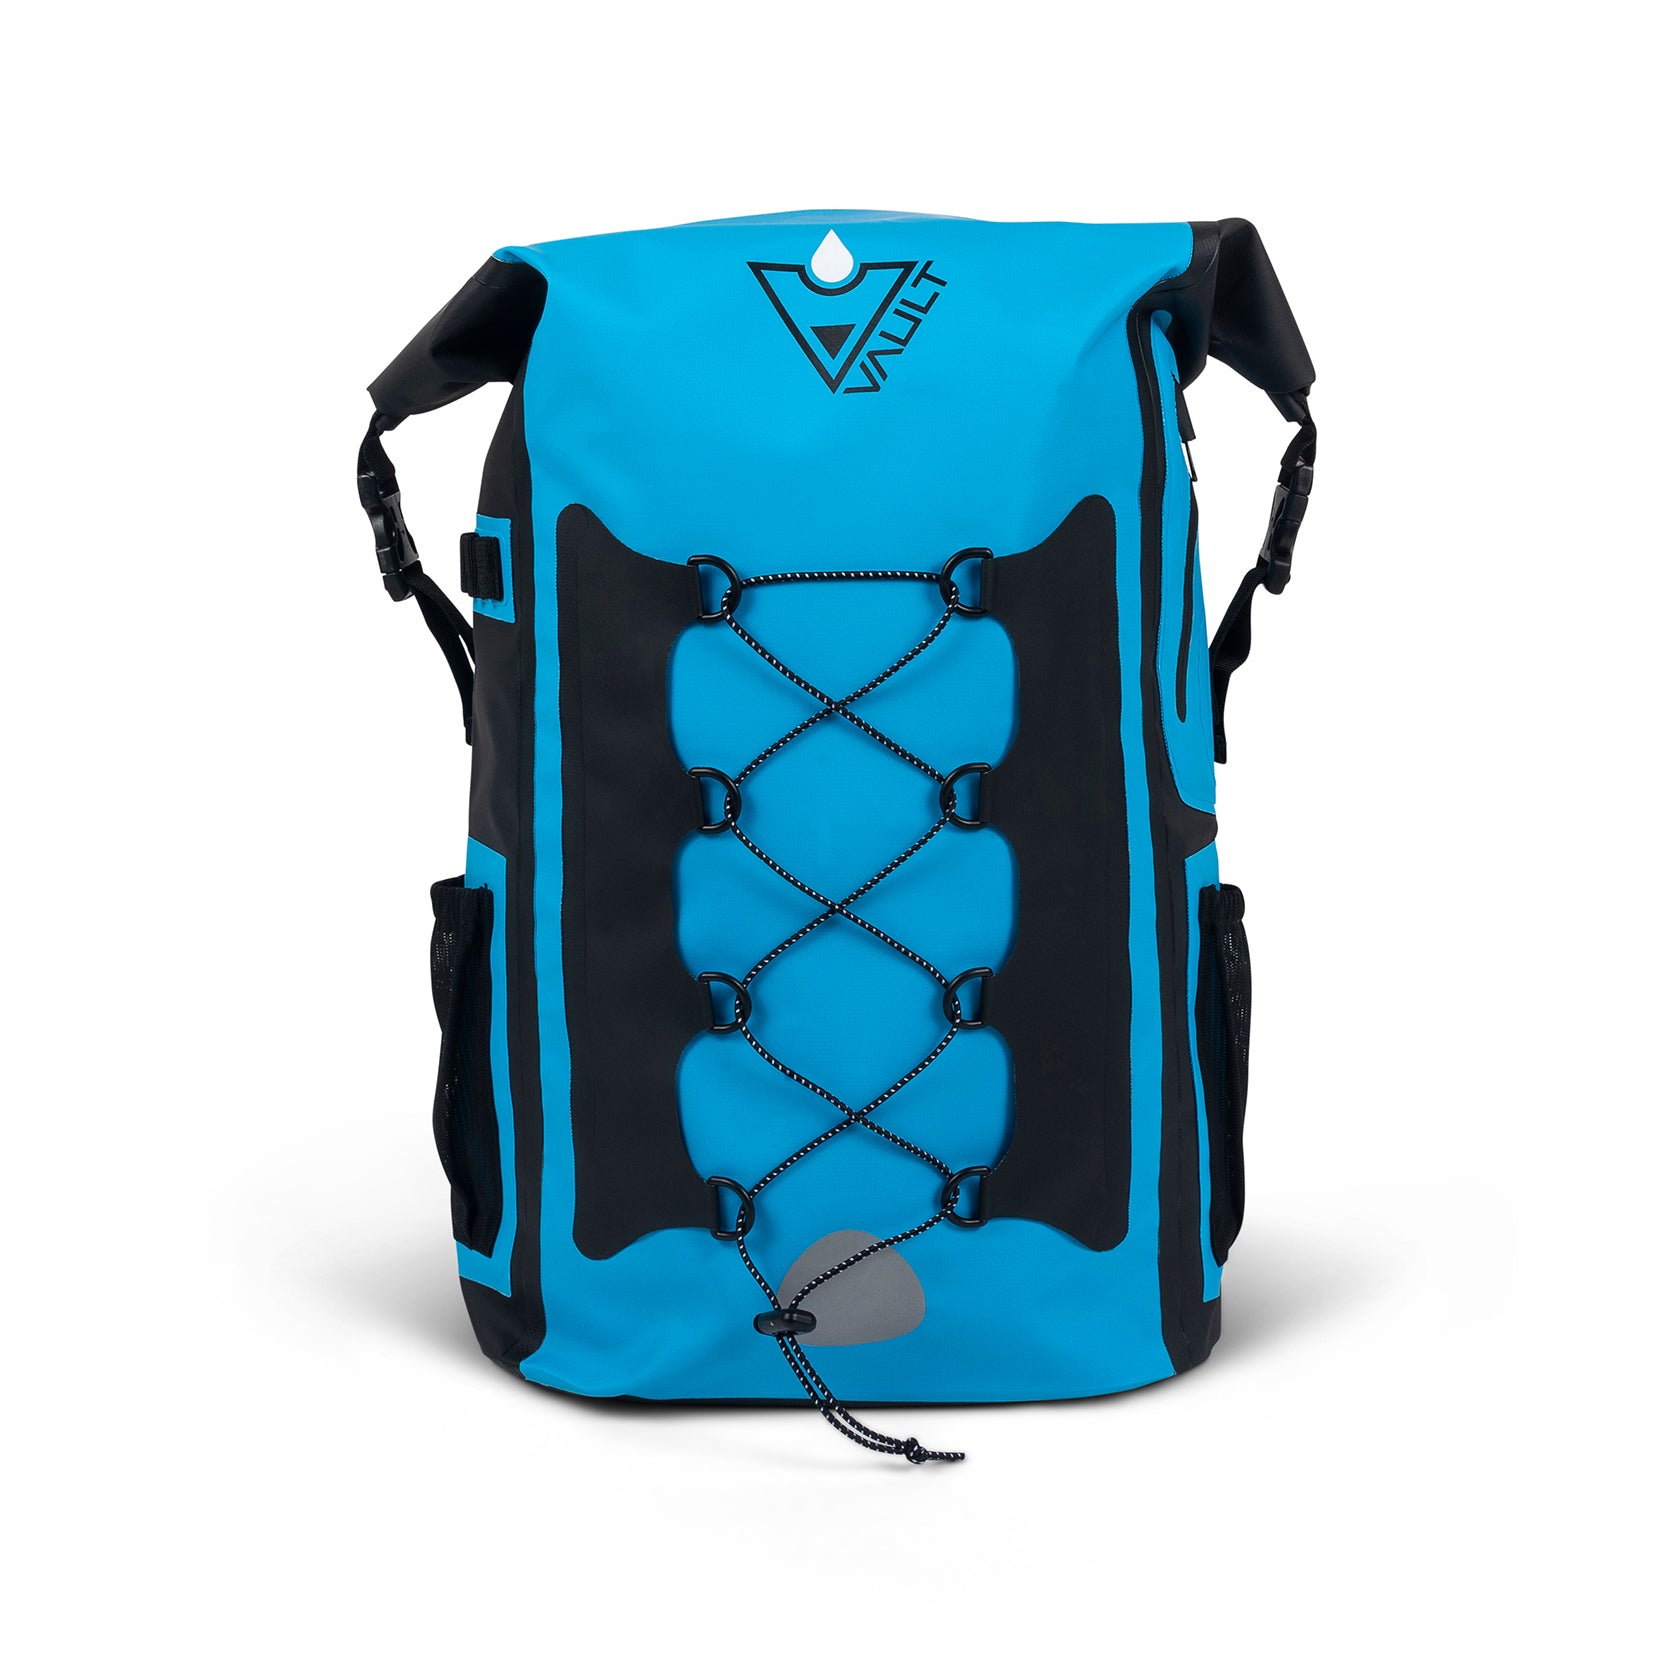 The most sleek stylish rugged and comfortable waterproof backpack on the market